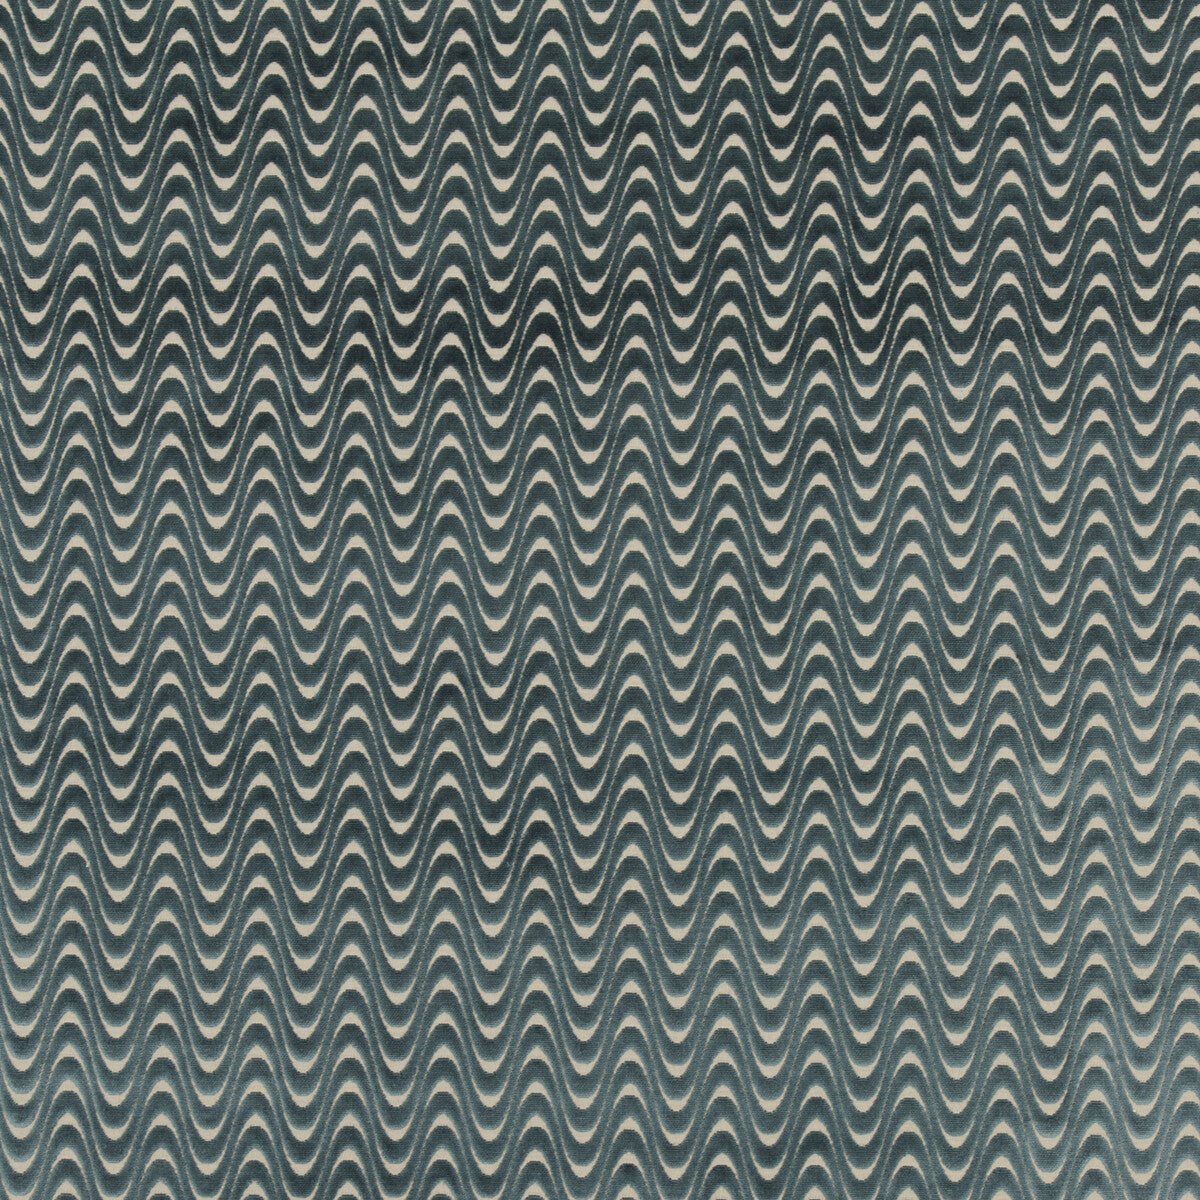 Jive fabric in teal color - pattern PF50421.615.0 - by Baker Lifestyle in the Carnival collection